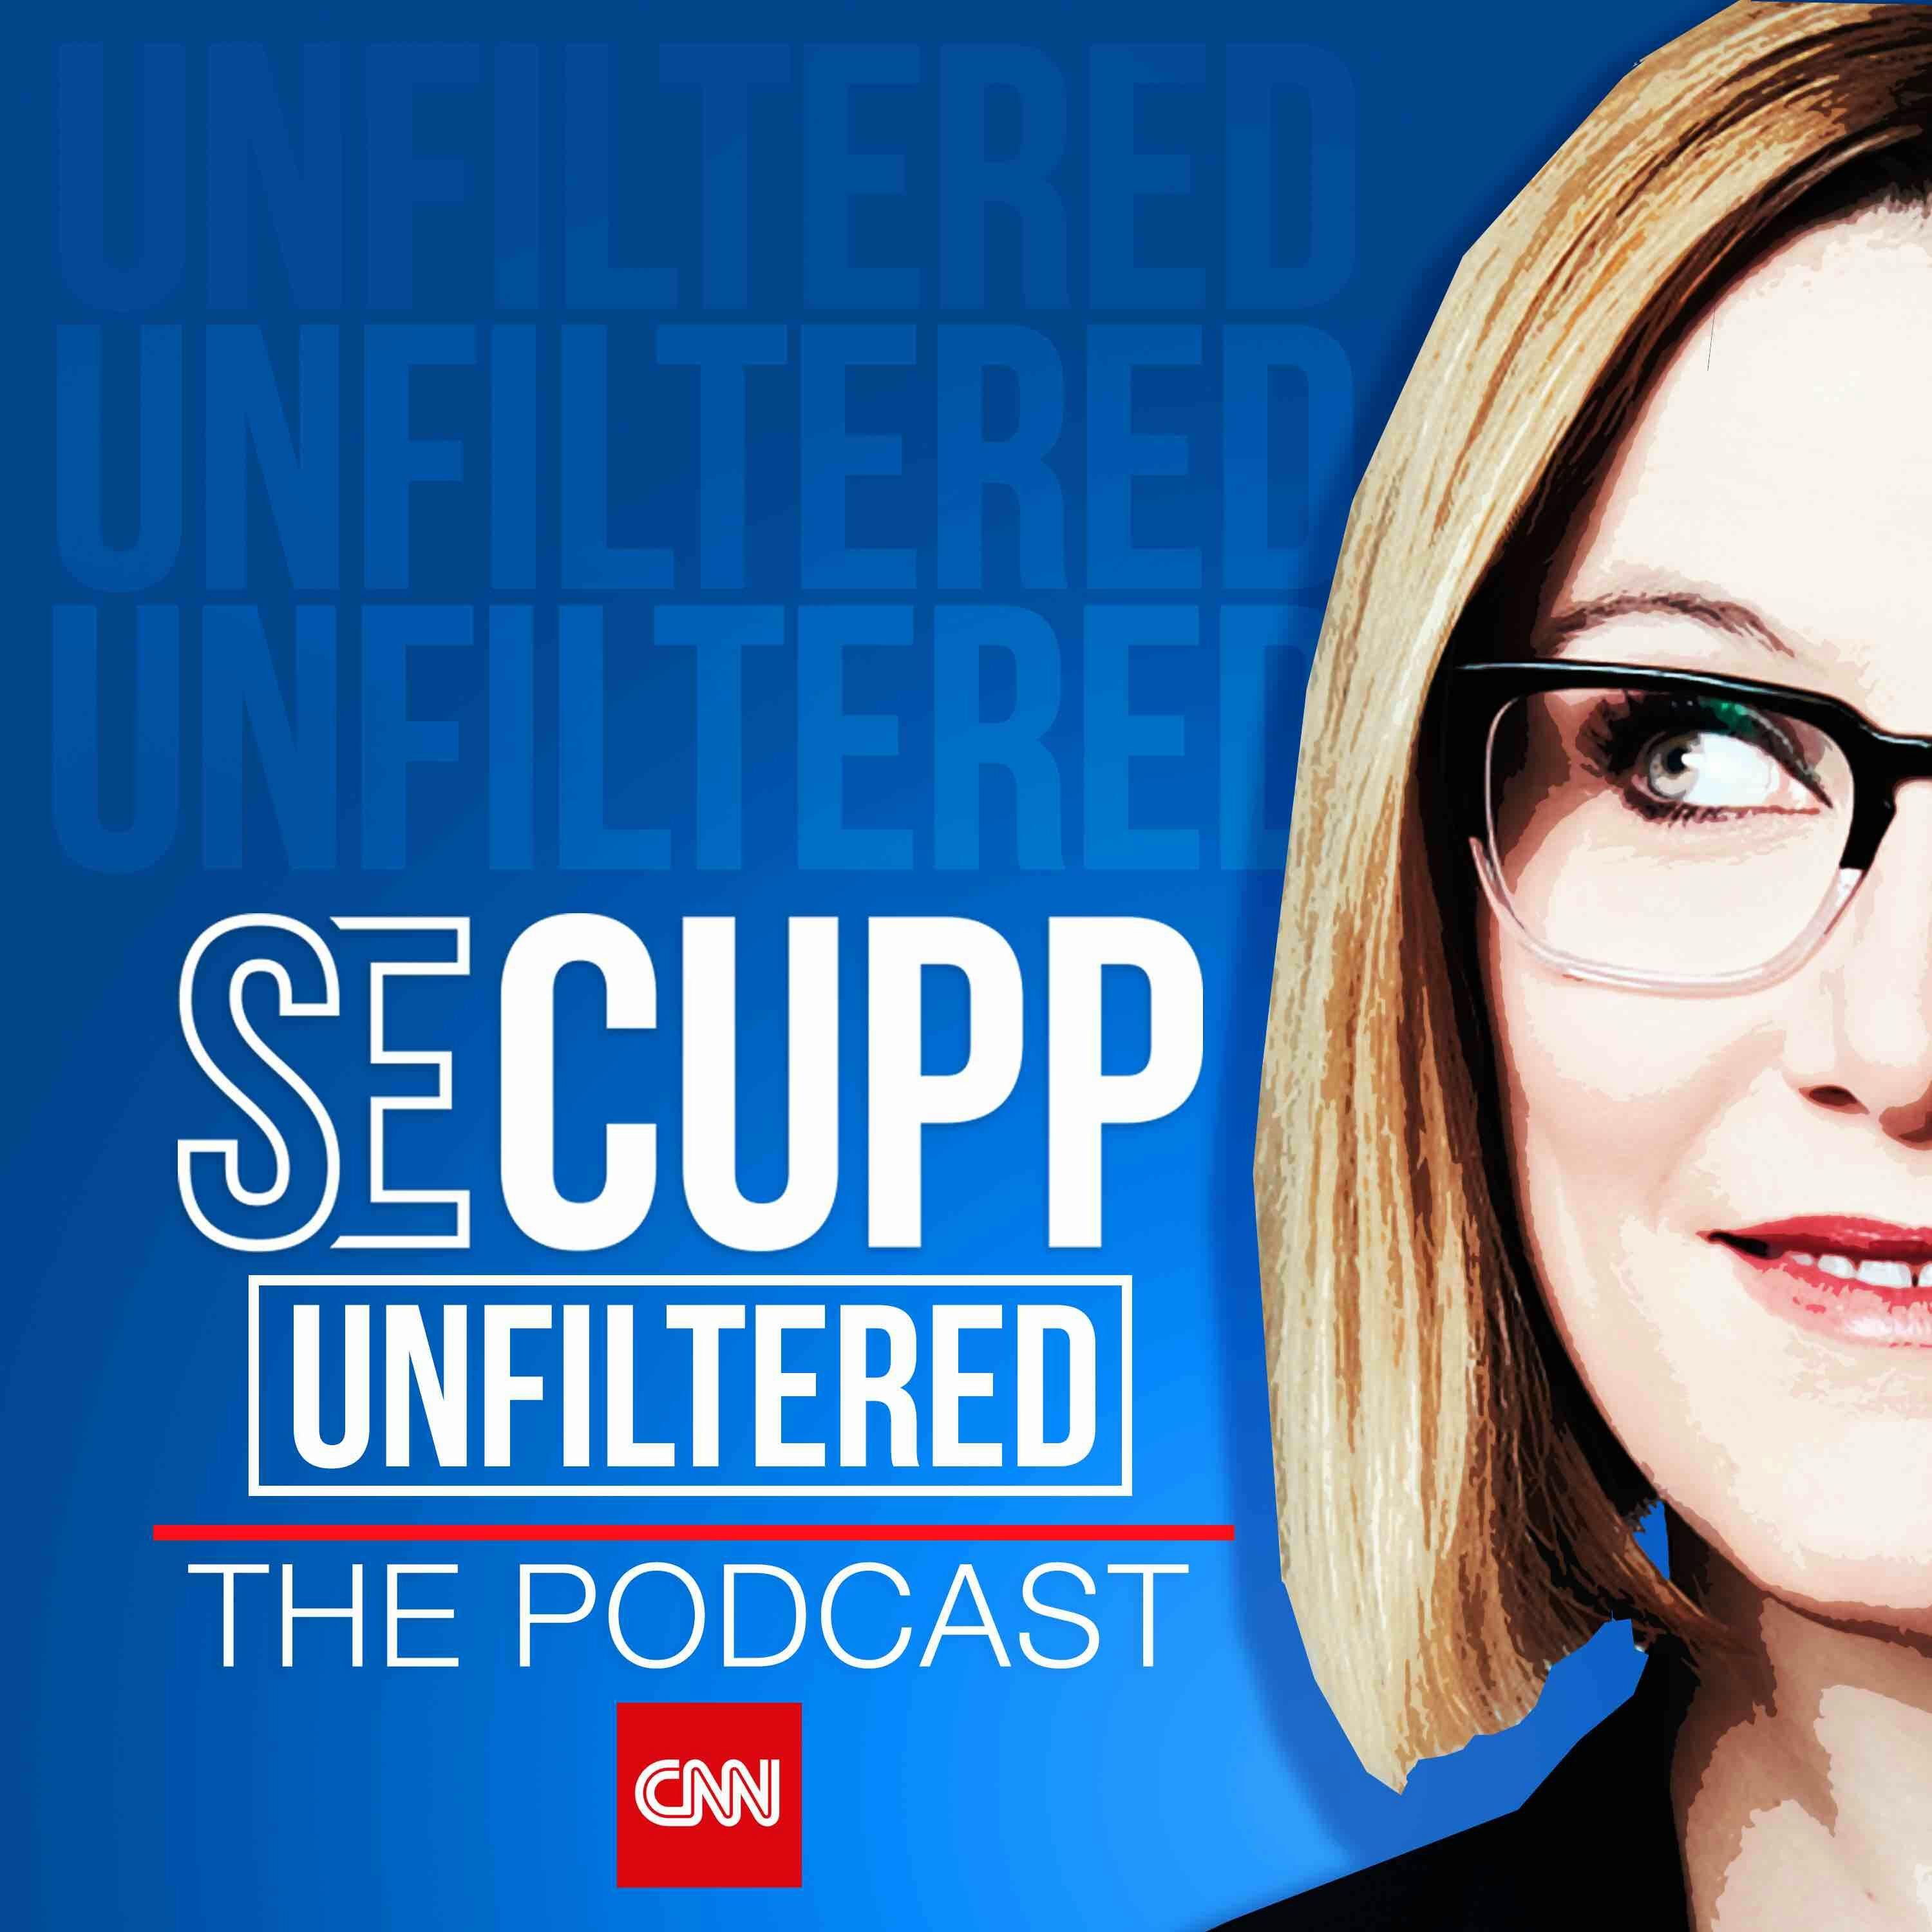 A Special Edition of SE Cupp Unfiltered: The United States of Hate